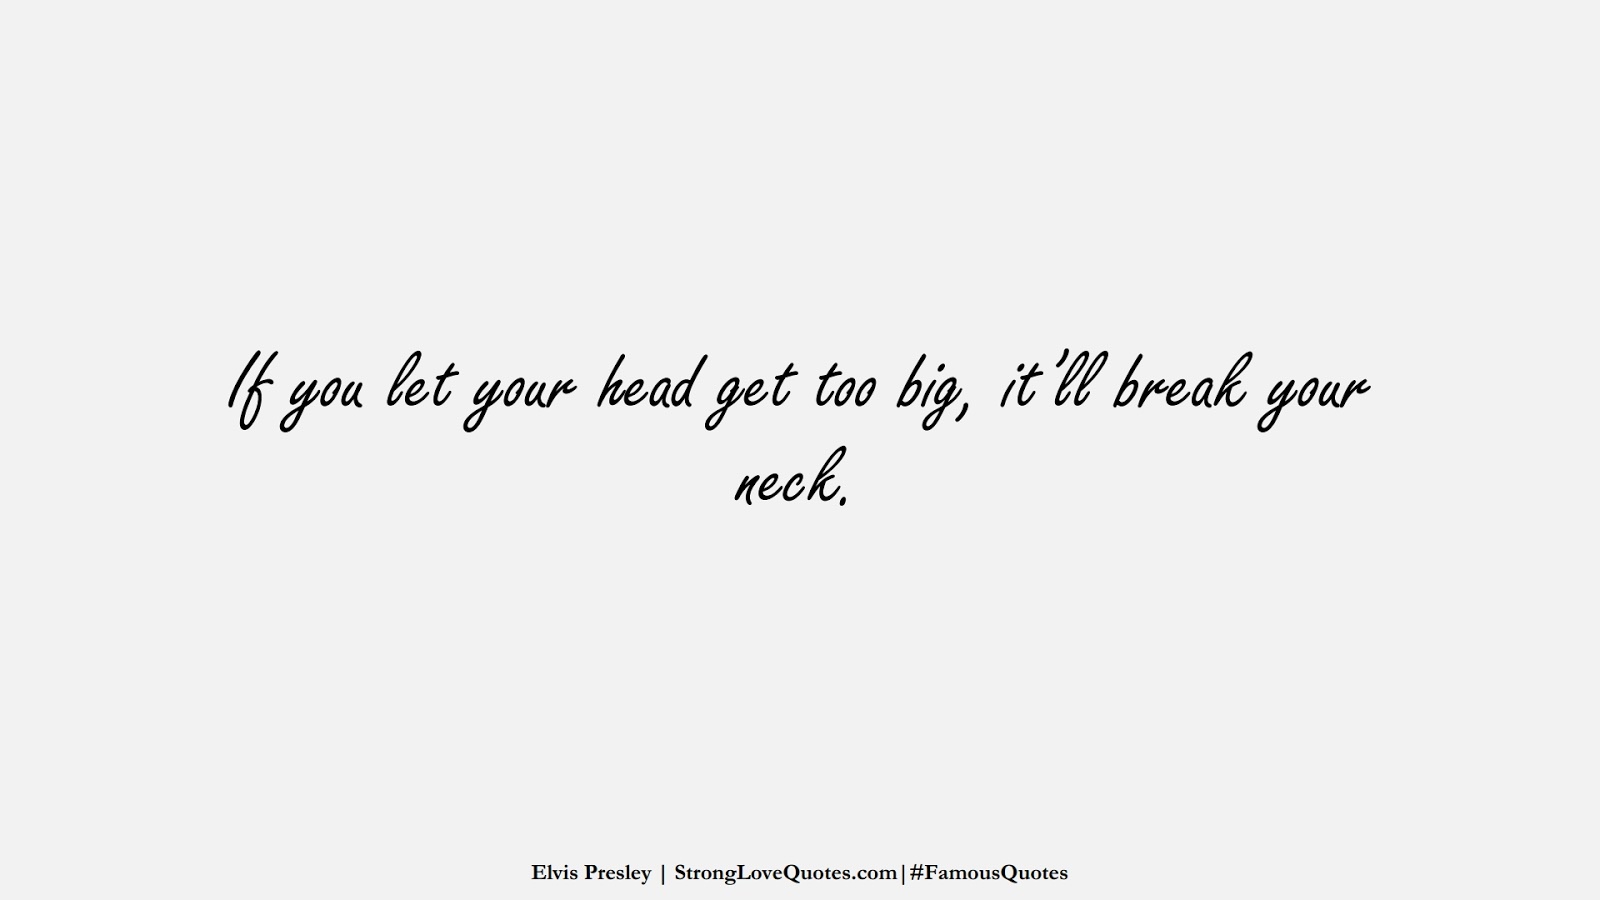 If you let your head get too big, it’ll break your neck. (Elvis Presley);  #FamousQuotes